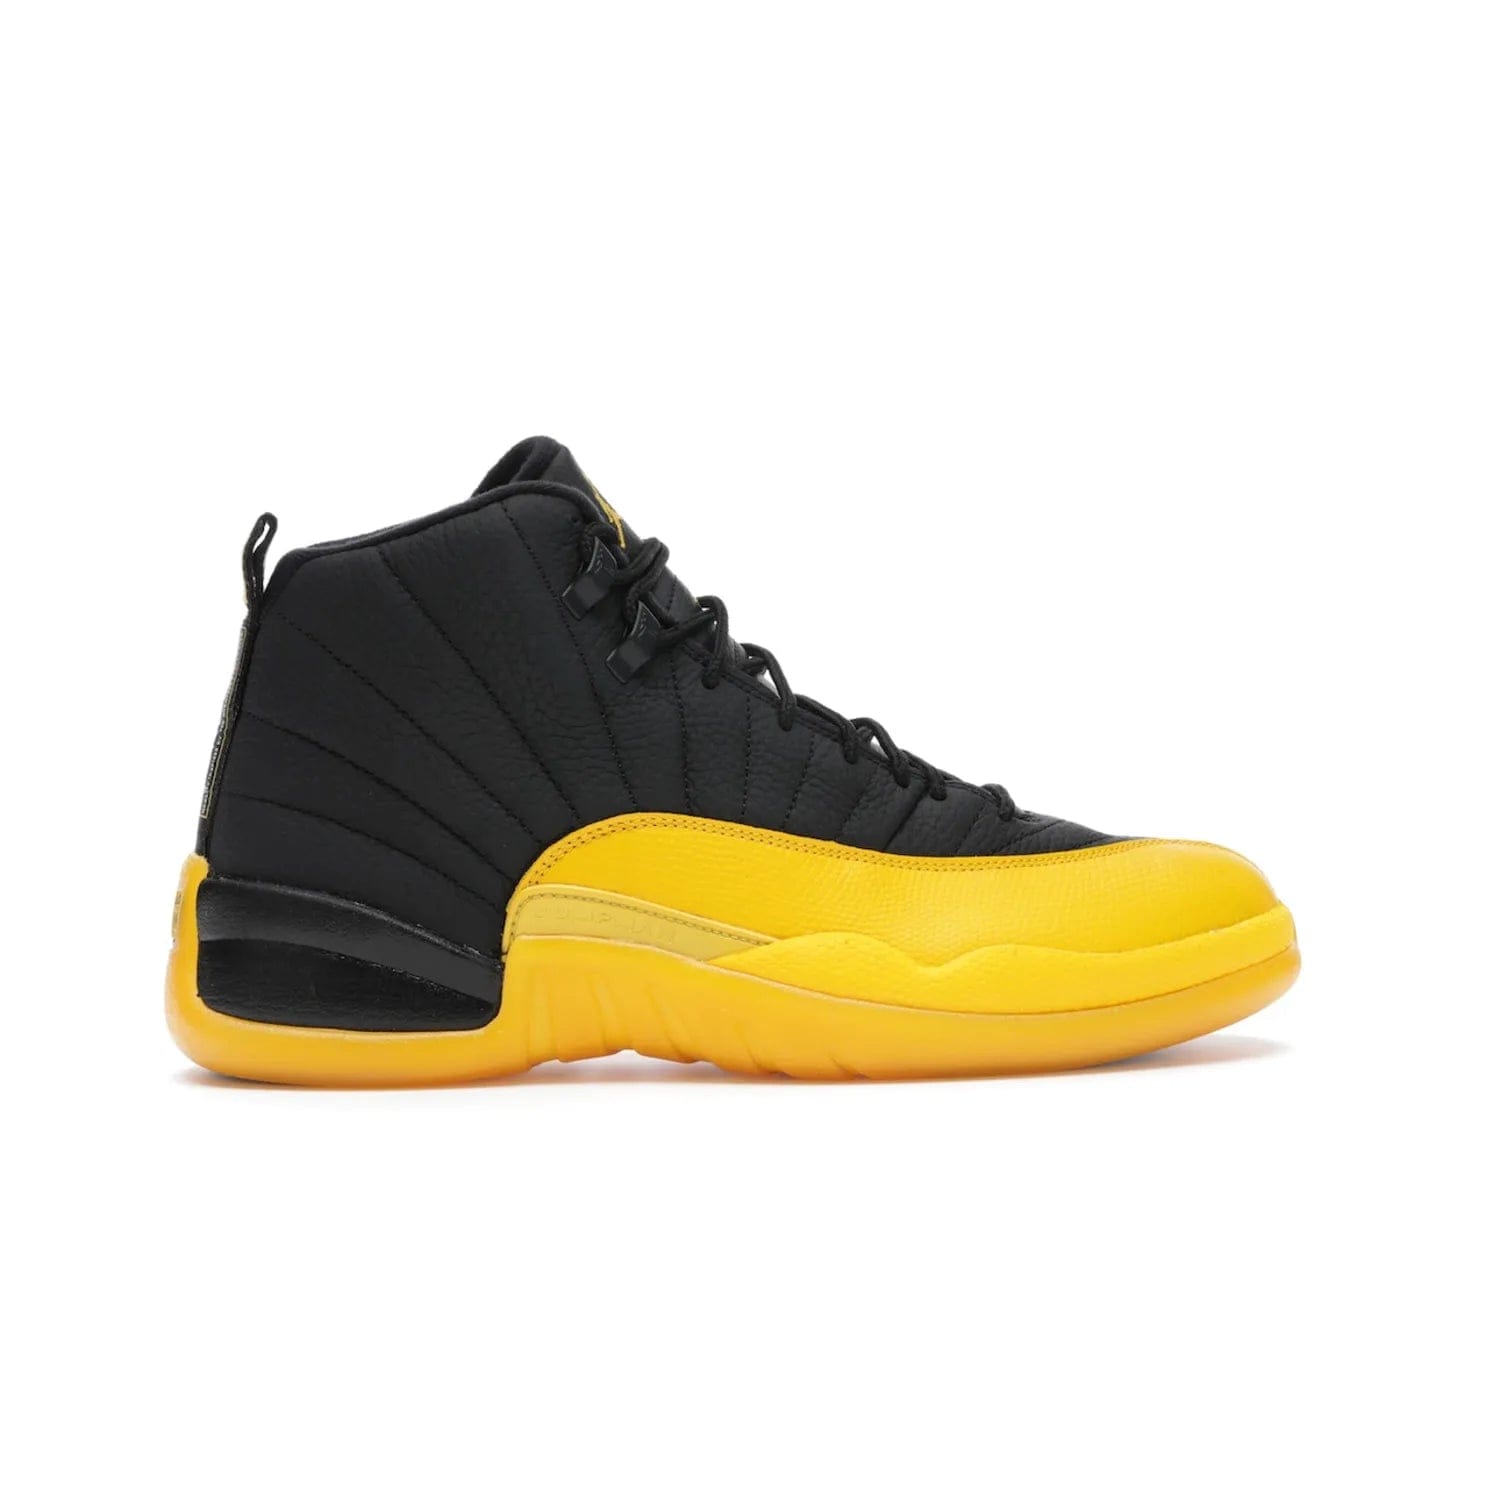 Jordan 12 Retro Black University Gold - Image 36 - Only at www.BallersClubKickz.com - This Jordan 12 Retro features a black tumbled leather upper and University Gold accents for a modern twist. Boasting Jordan "Two Three" branding and a yellow sole, these shoes will elevate your wardrobe. Fresh, sleek, and one of a kind - the Jordan 12 University Gold is your summer sneaker.